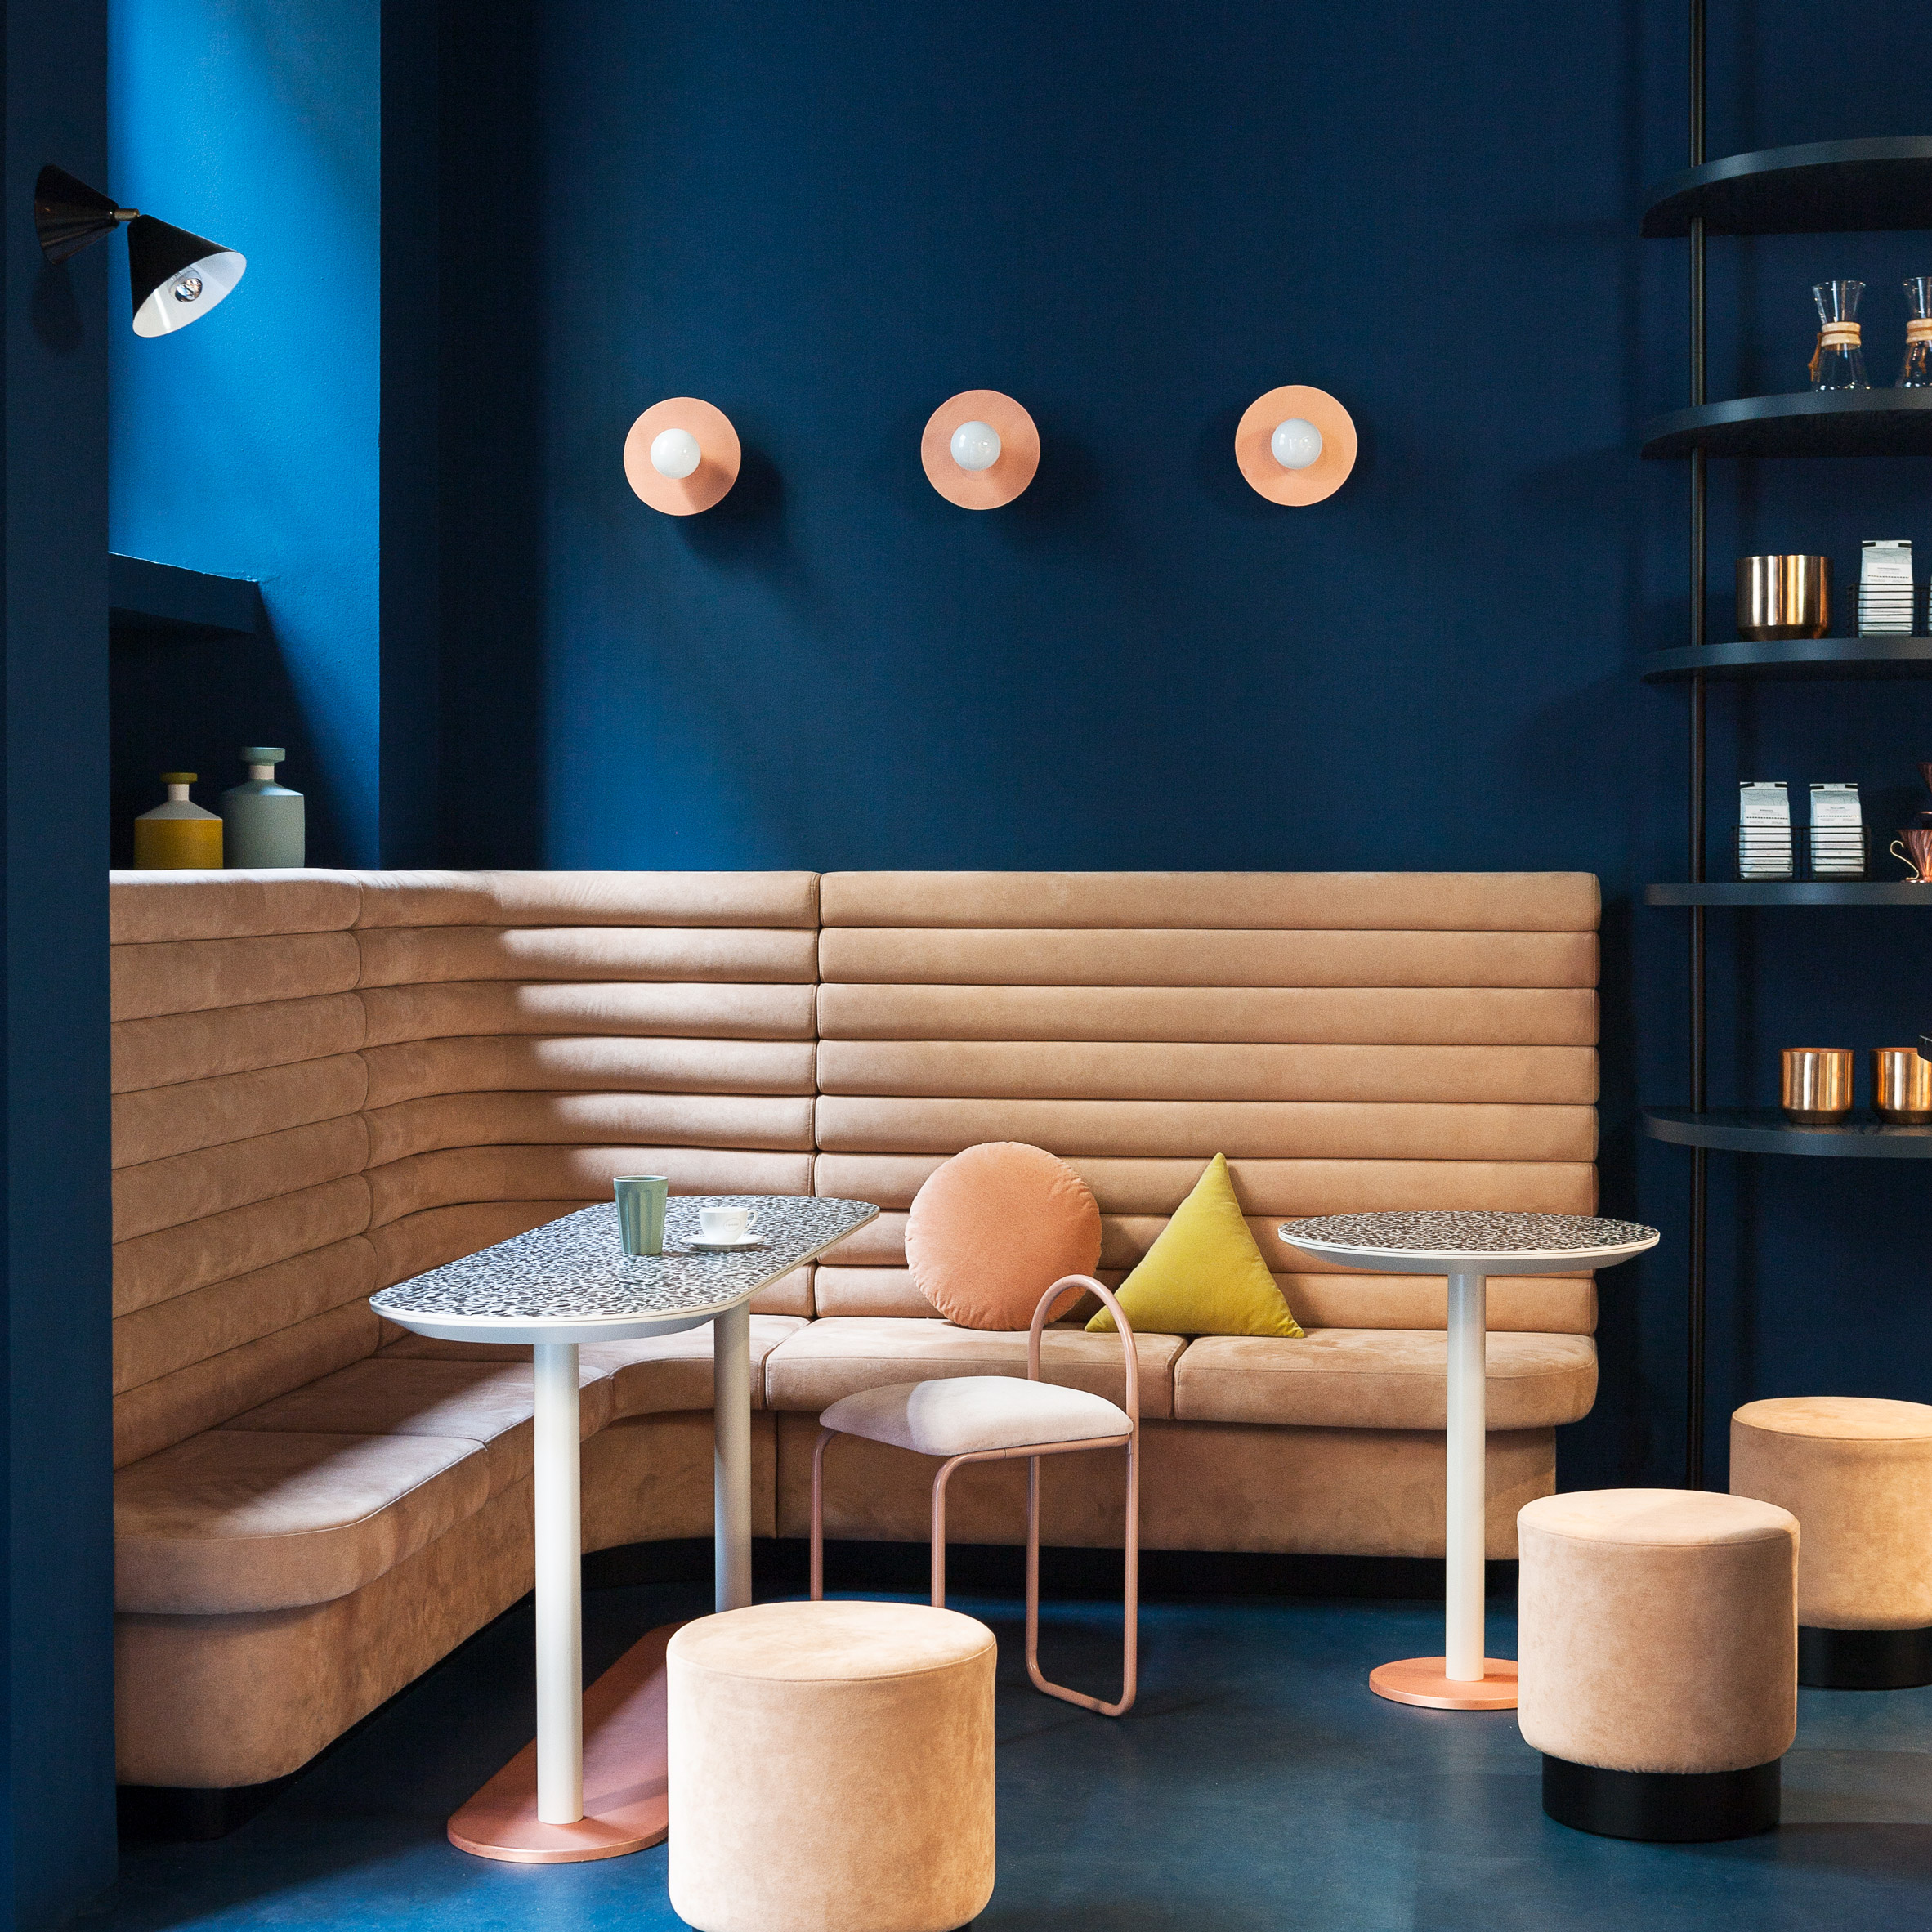 Milan travel guide: Cafezal by Studiopepe